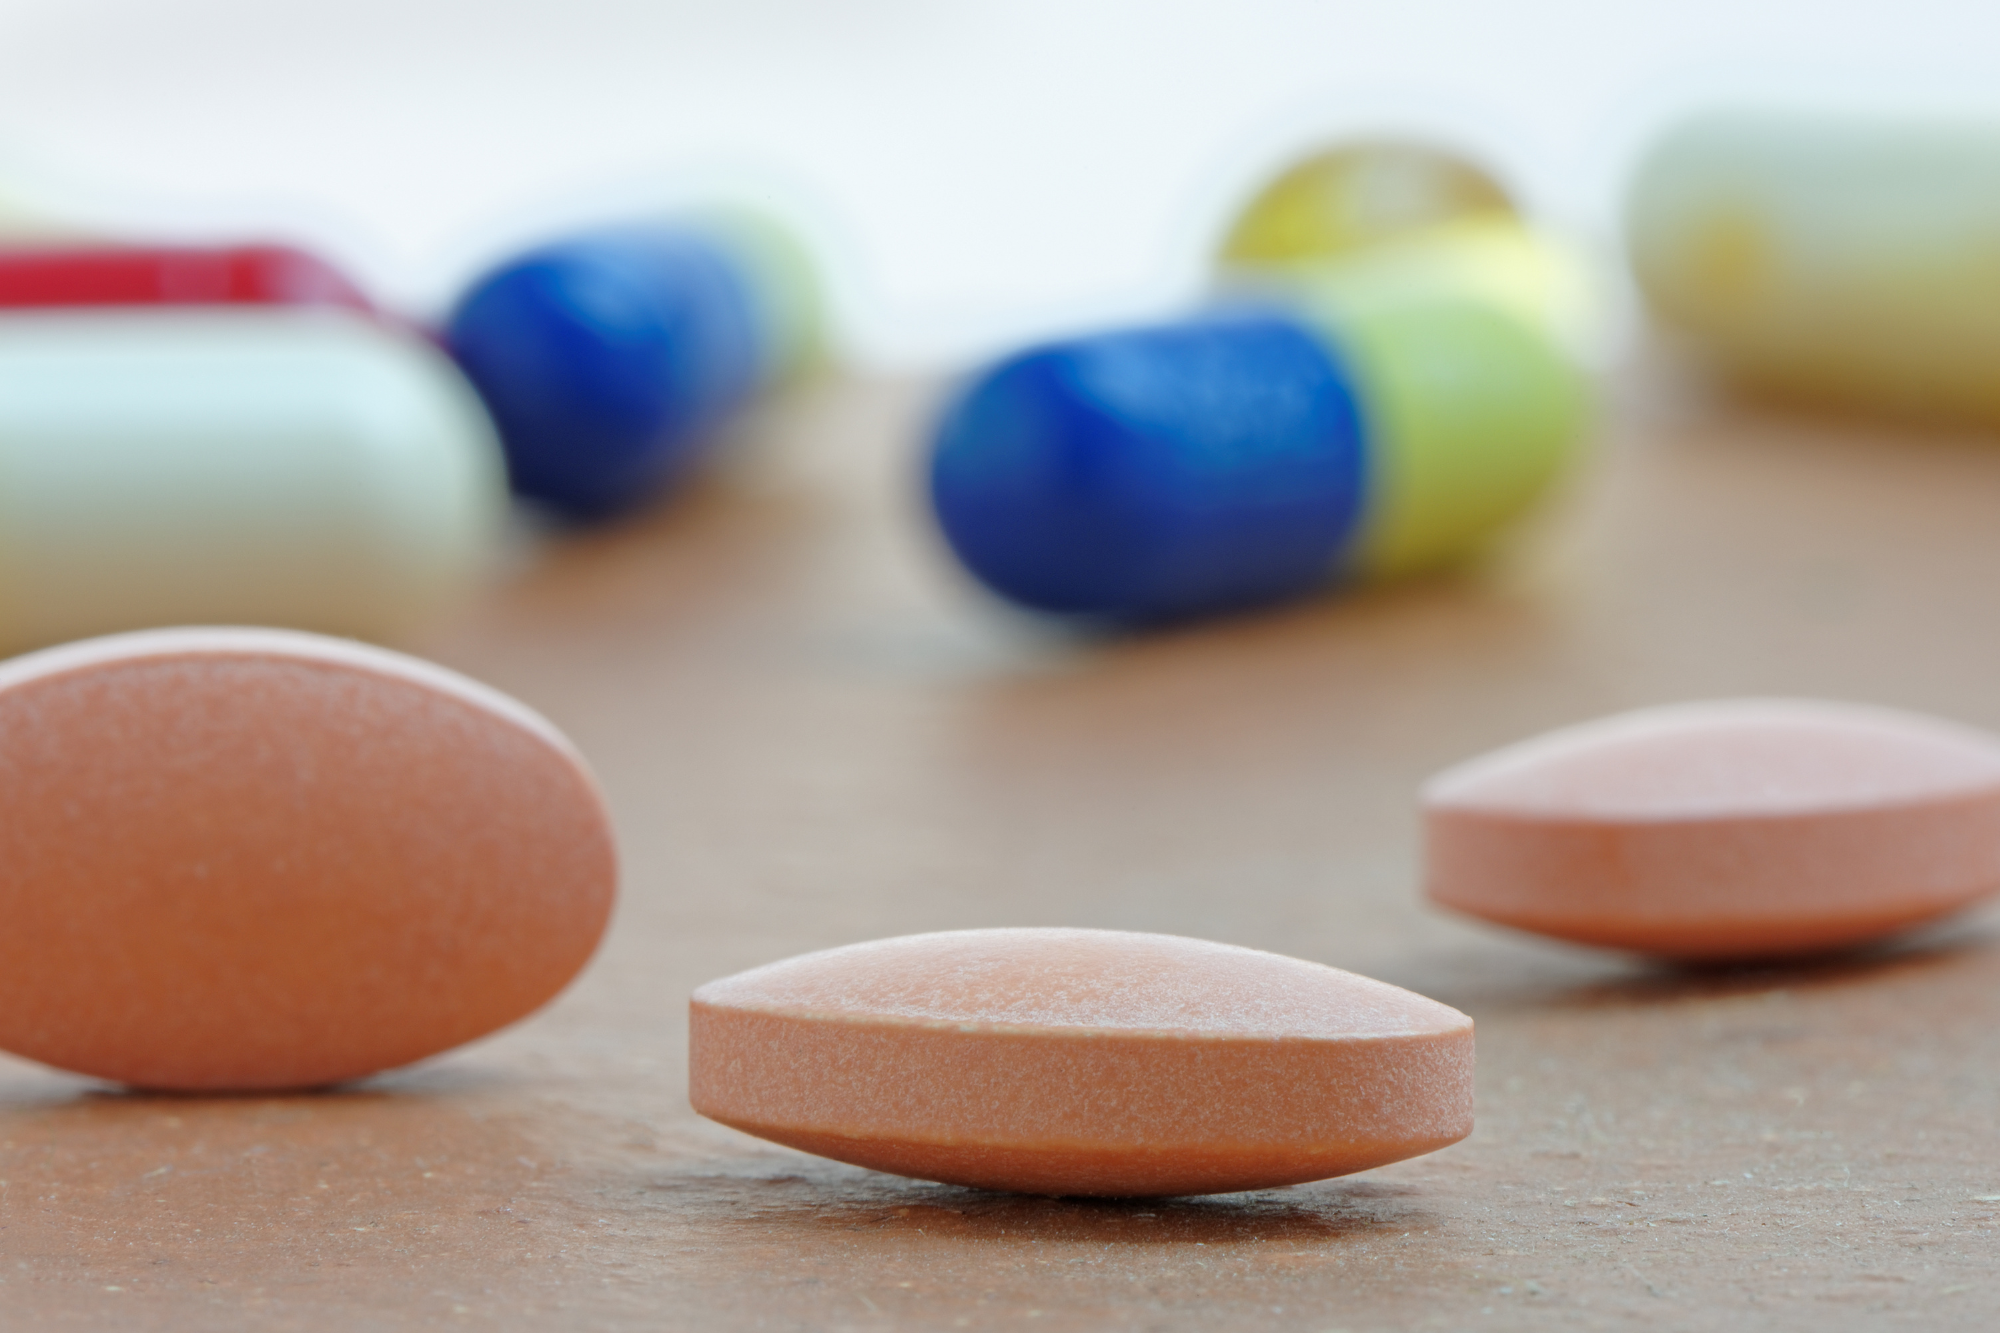 Three statin pills for cholesterol sit close on a wooden table, with out-of-focus pills lying in the background.